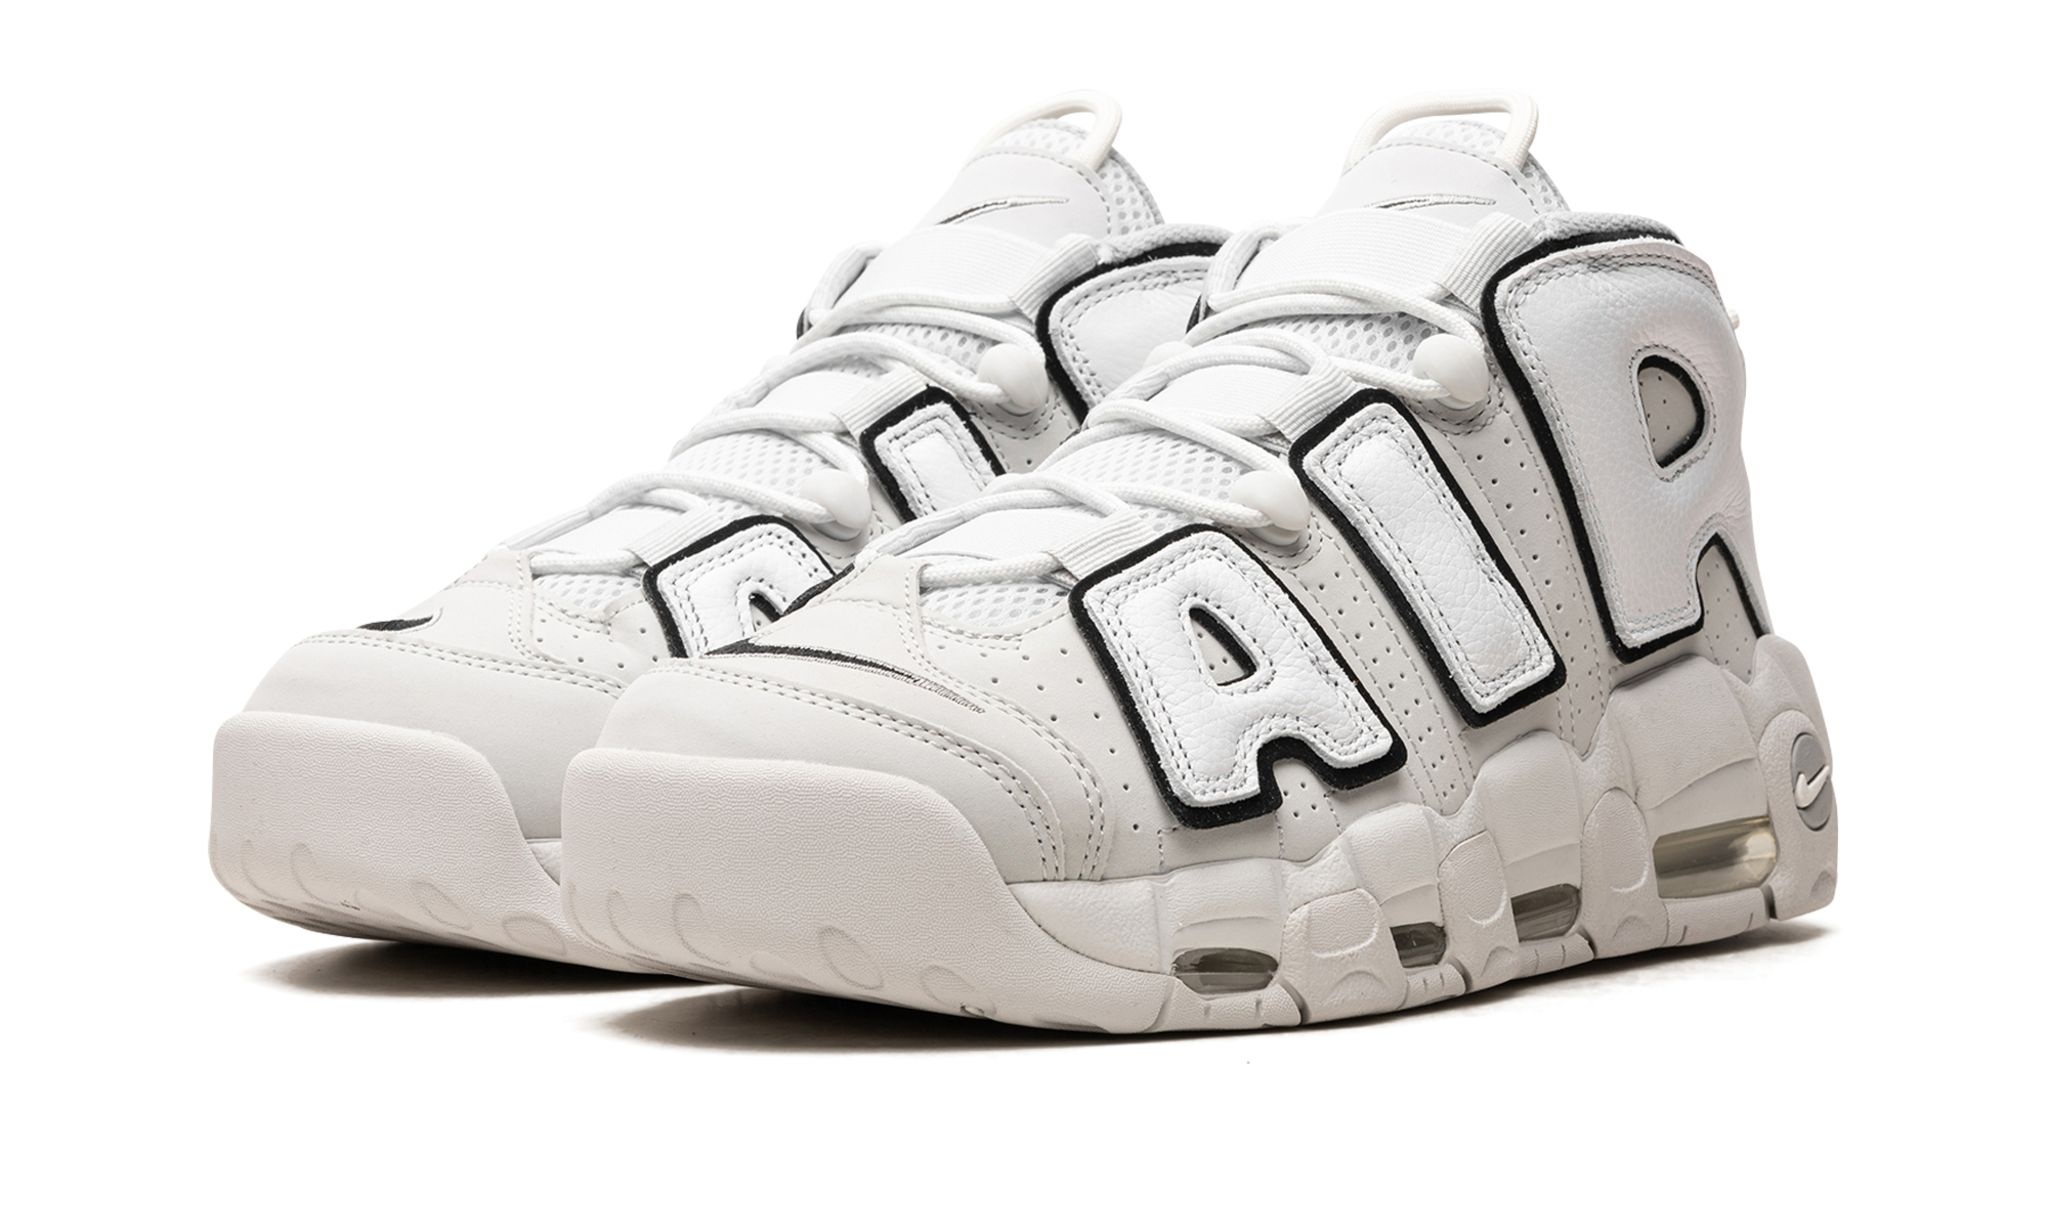 Air More Uptempo "Photon Dust" - 2